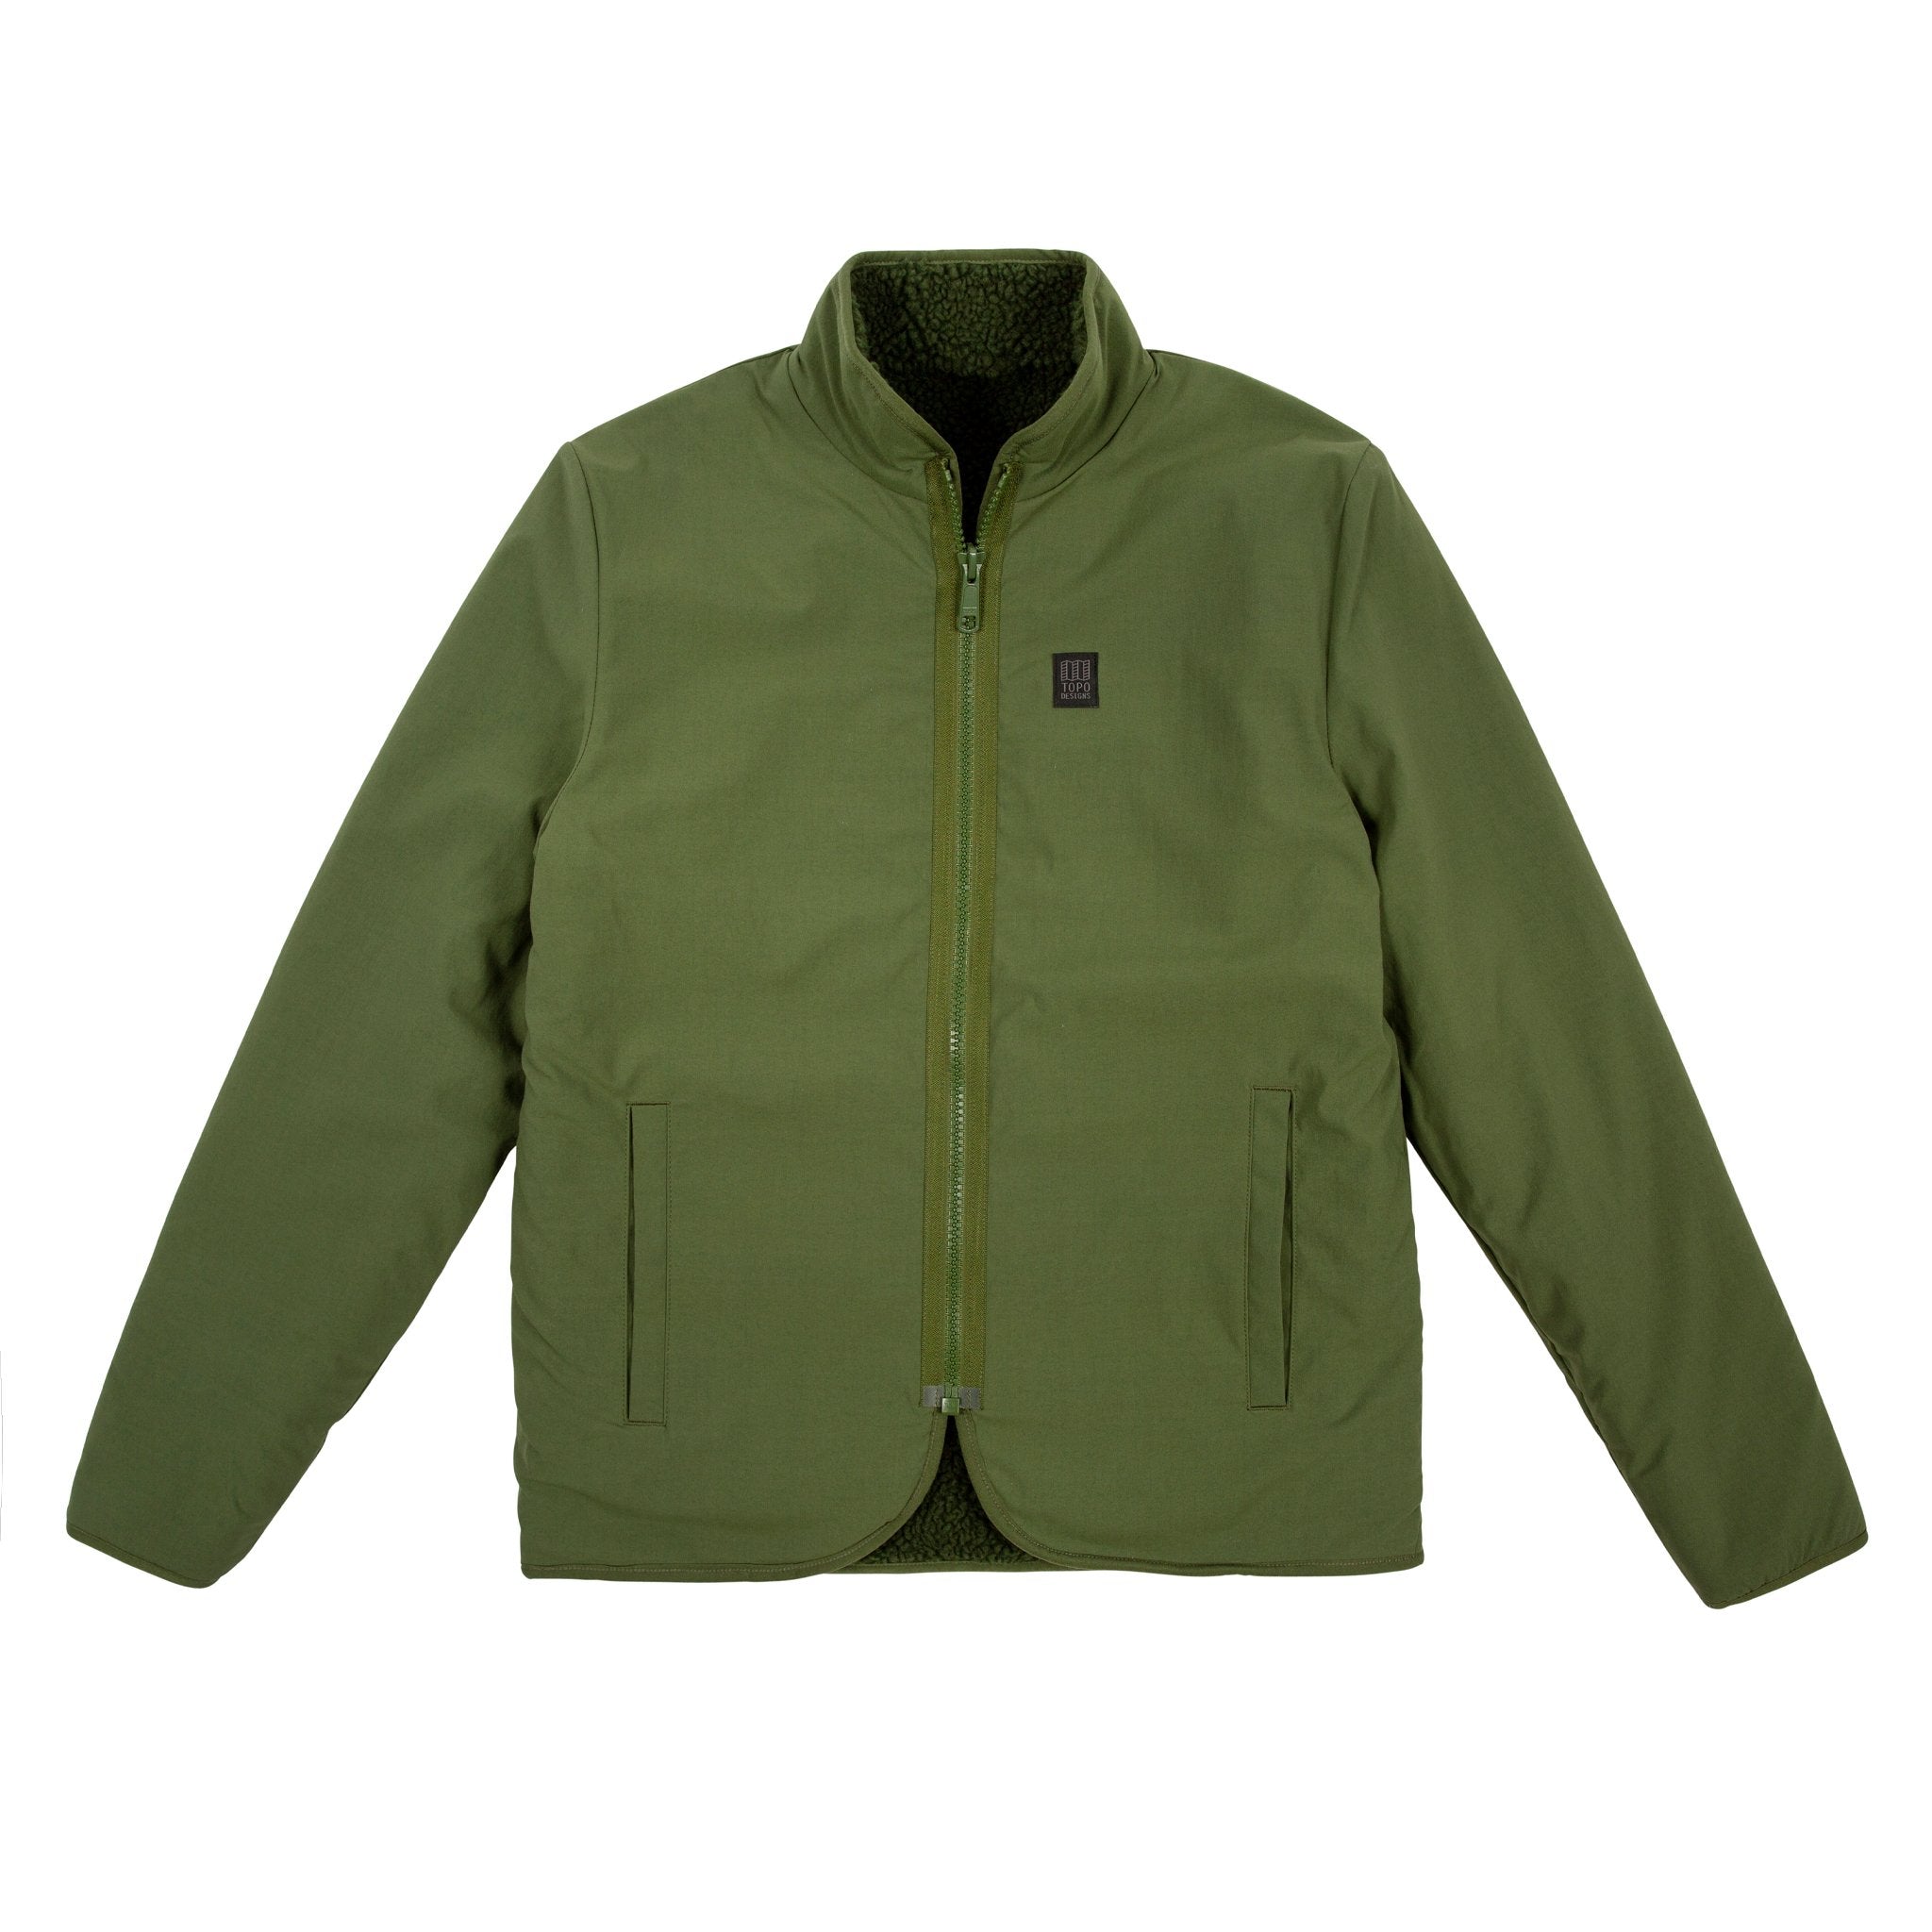 Front product shot of Topo Designs Men's Sherpa Jacket in "Olive" green showing DWR side.